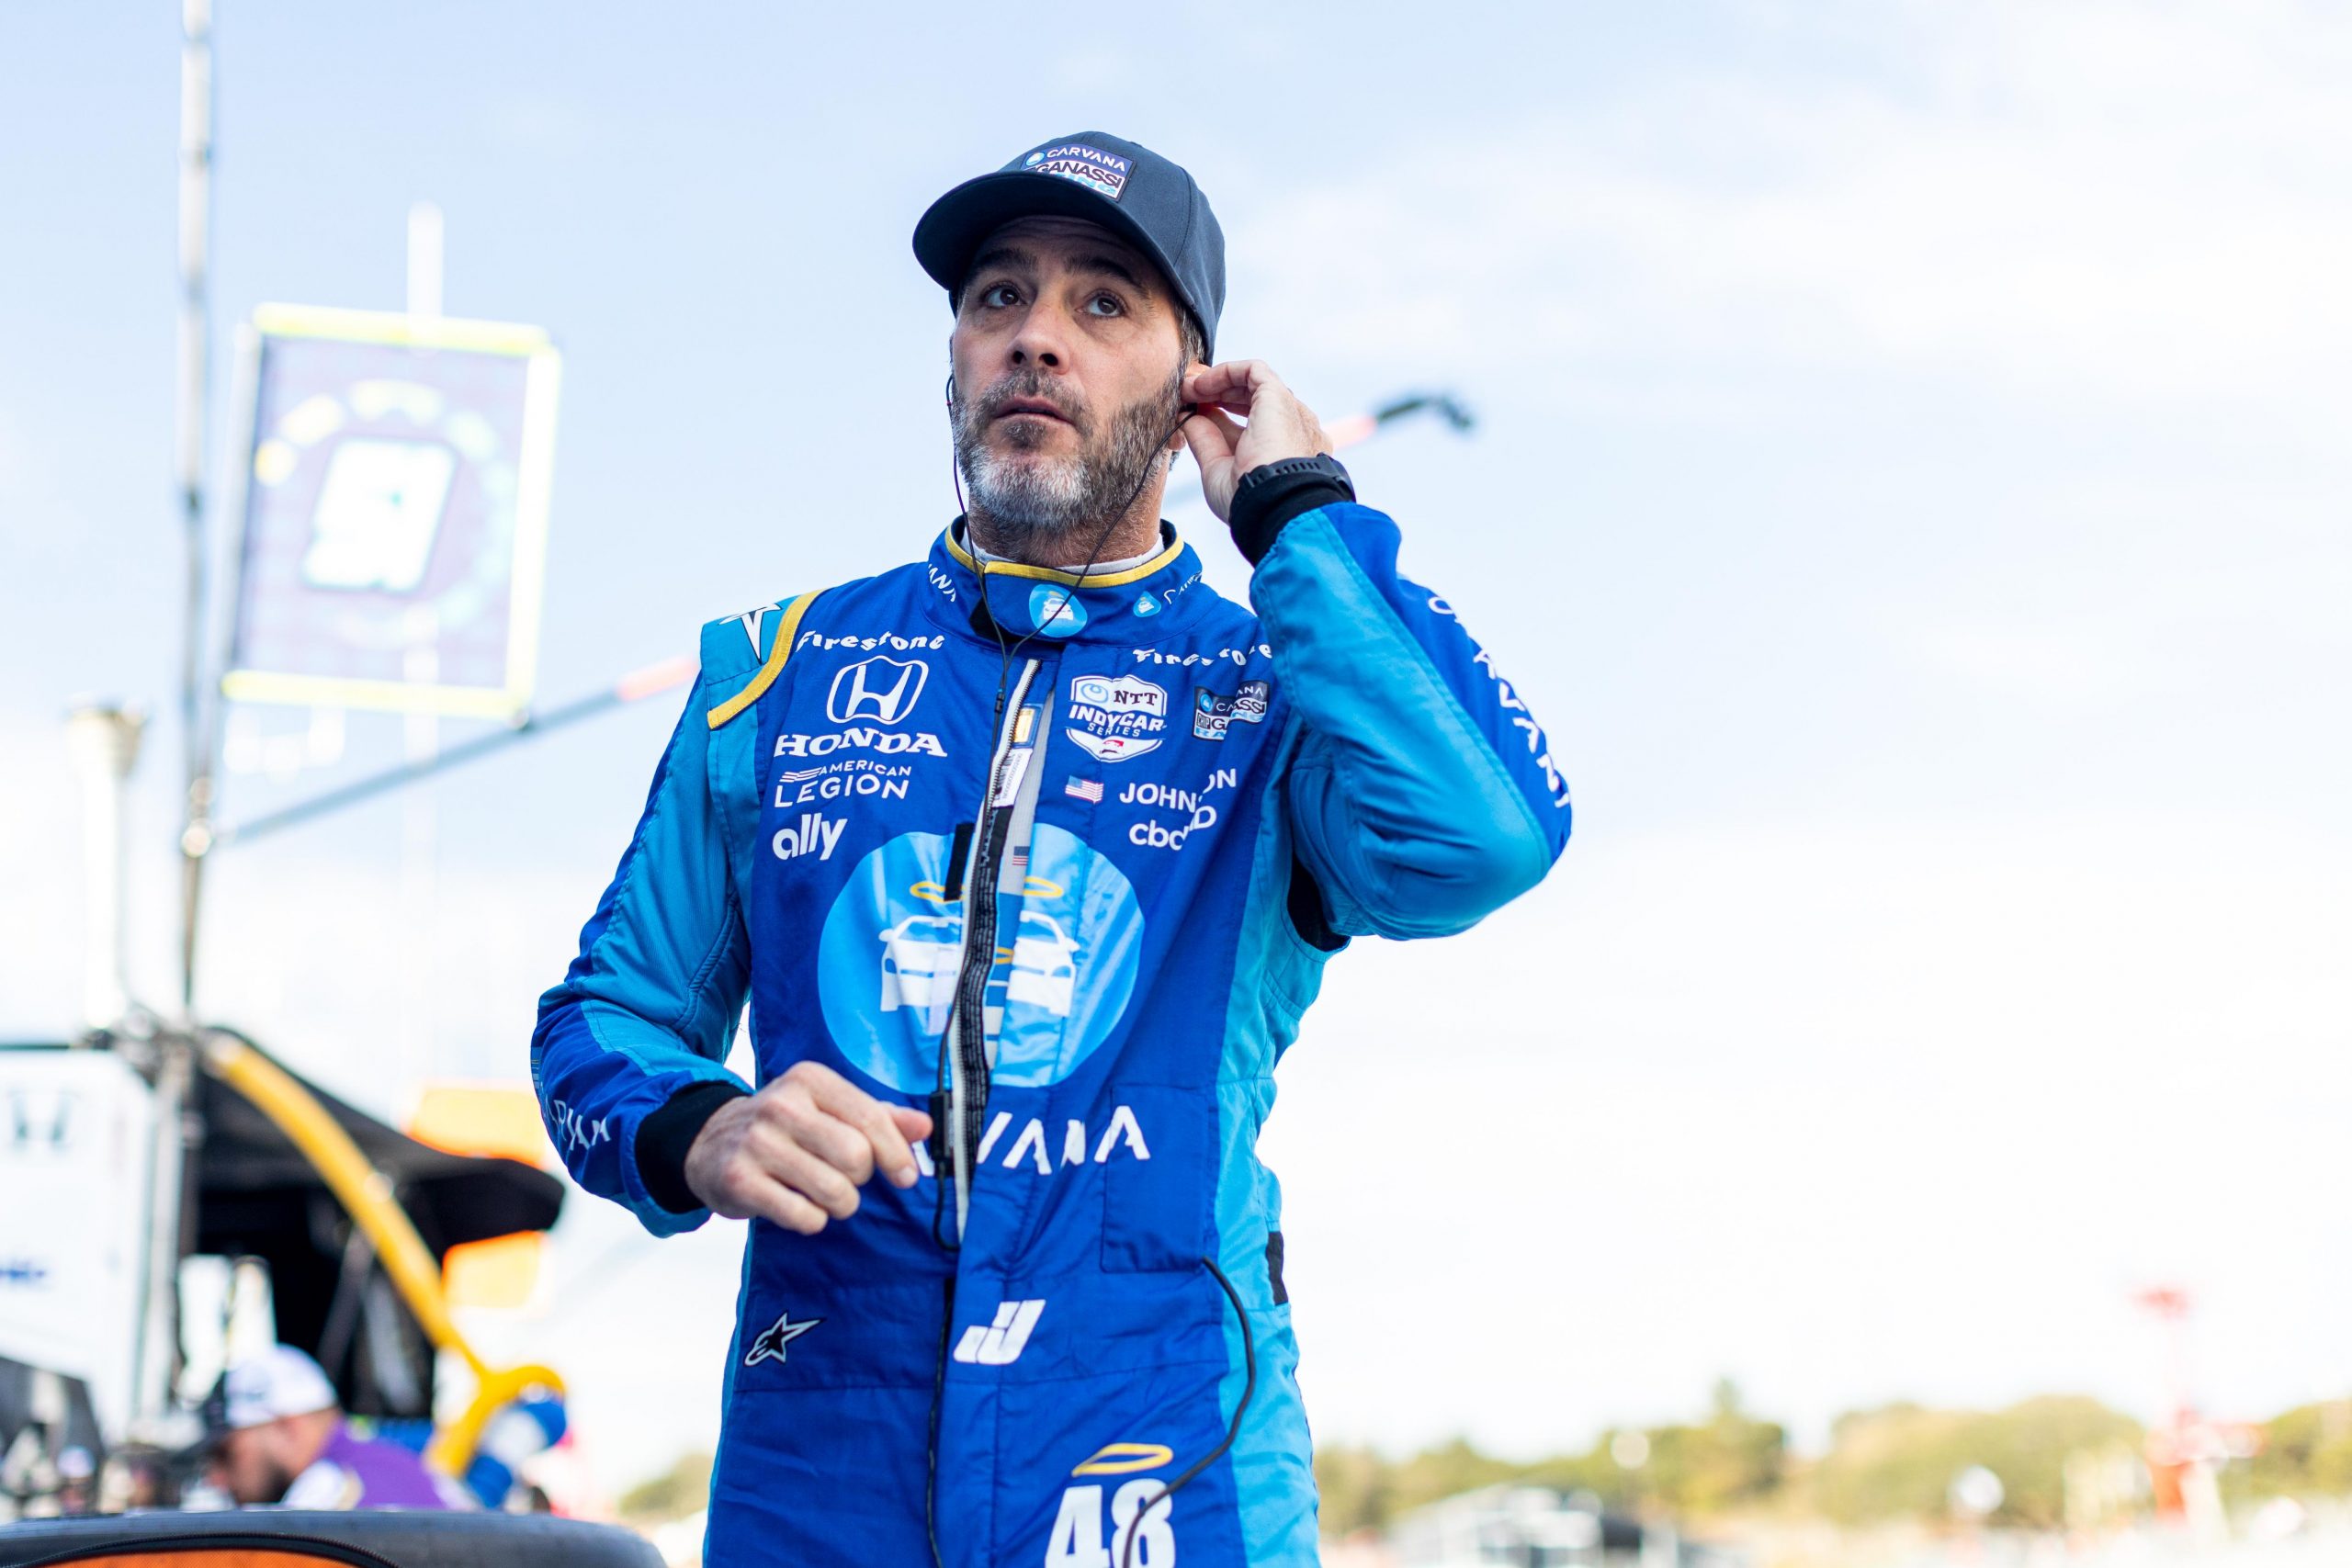 Jimmie Johnson on pit road before the 2022 Firestone Grand Prix of Monterey